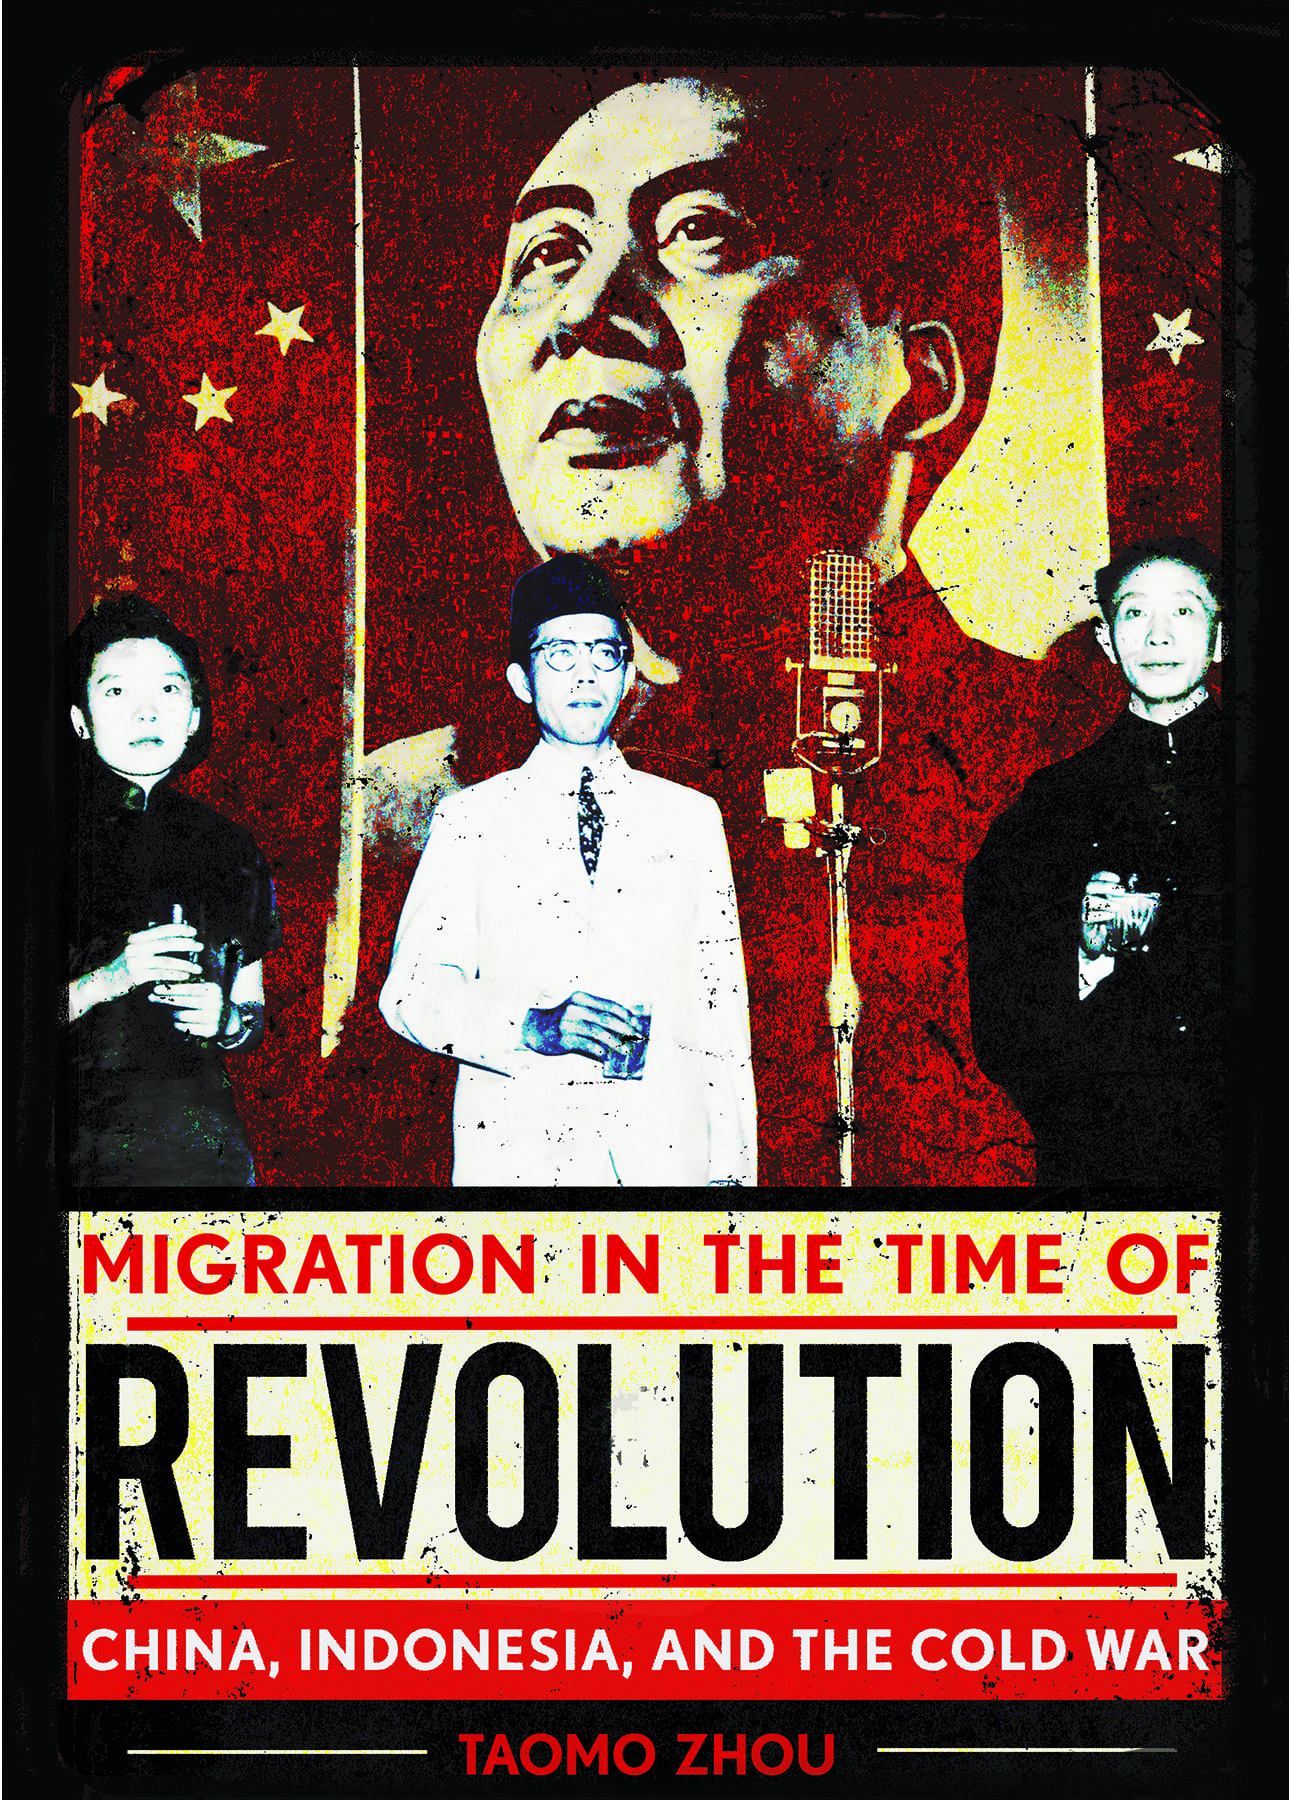 Migration in the time of revolution